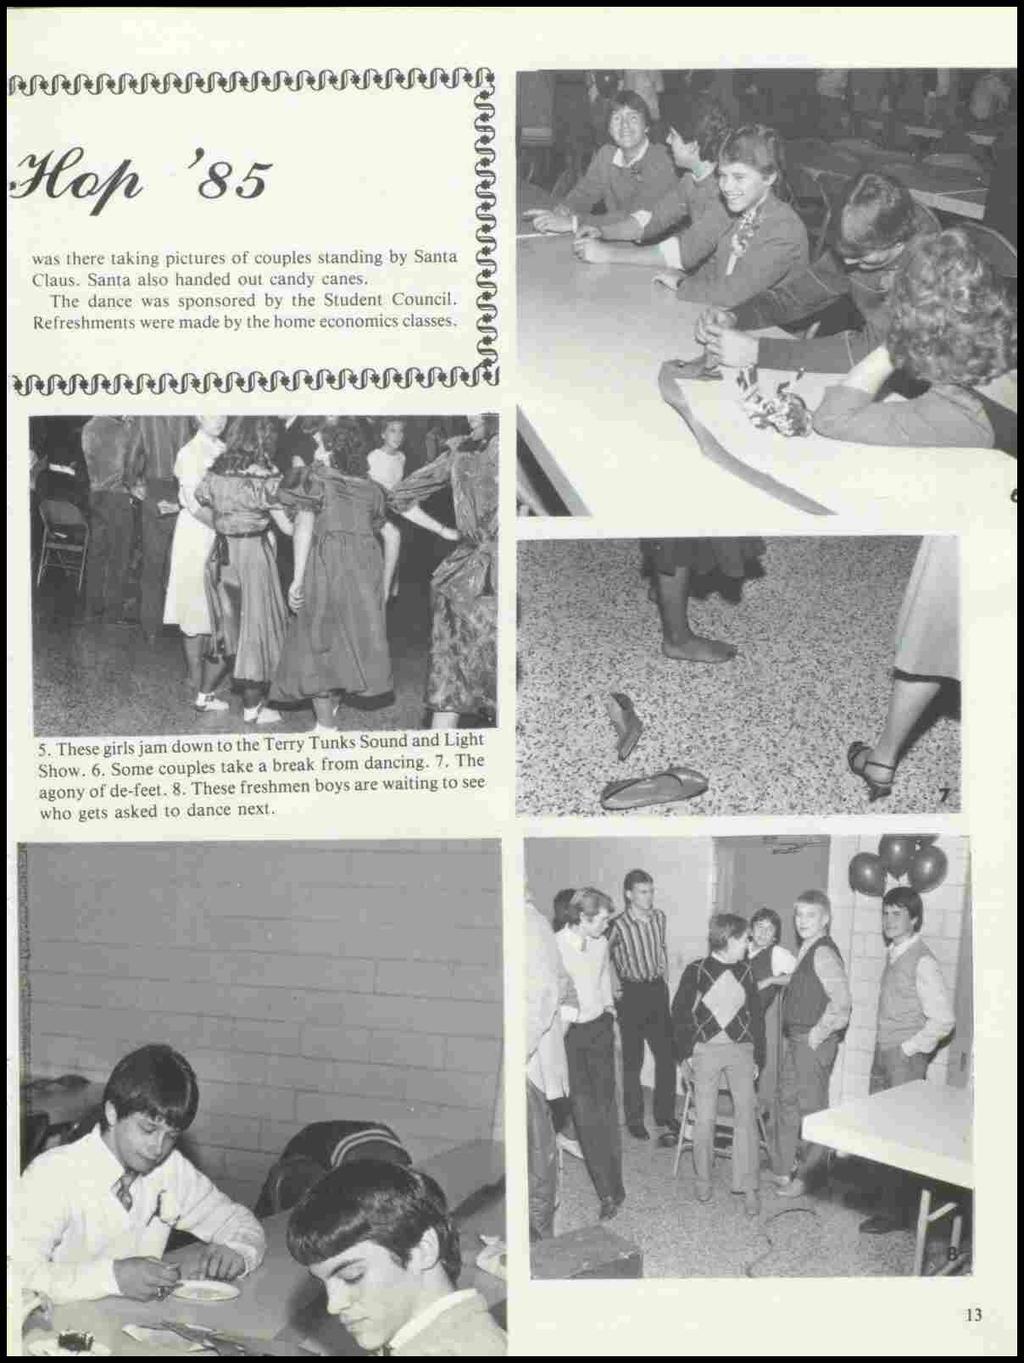 '85 was there taking pictures of couples standing by Santa Claus. Santa also handed out candy canes. The dance was sponsored by the Student Council.